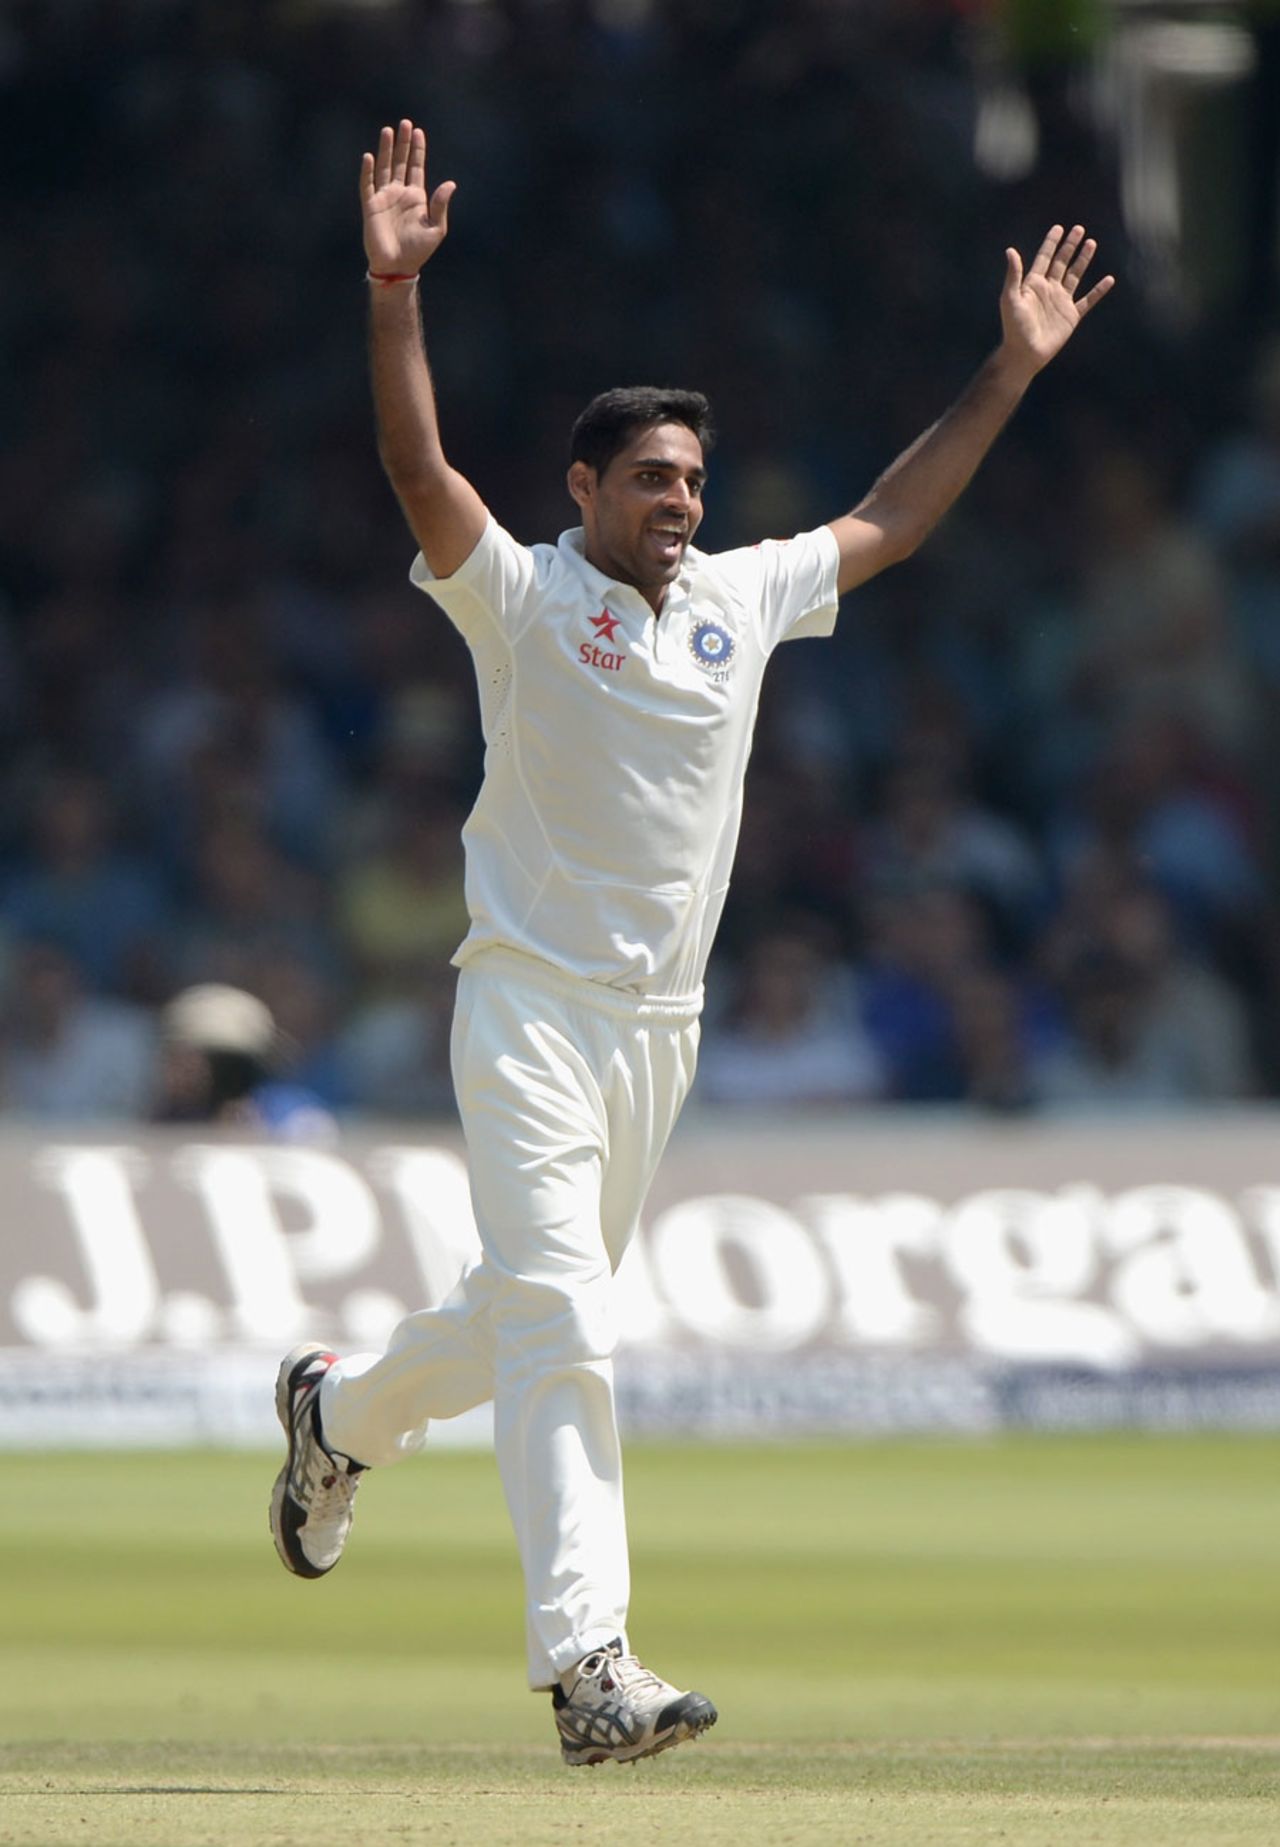 Bhuvneshwar Kumar struck twice early, England v India, 2nd Investec Test, Lord's, 2nd day, July 18, 2014